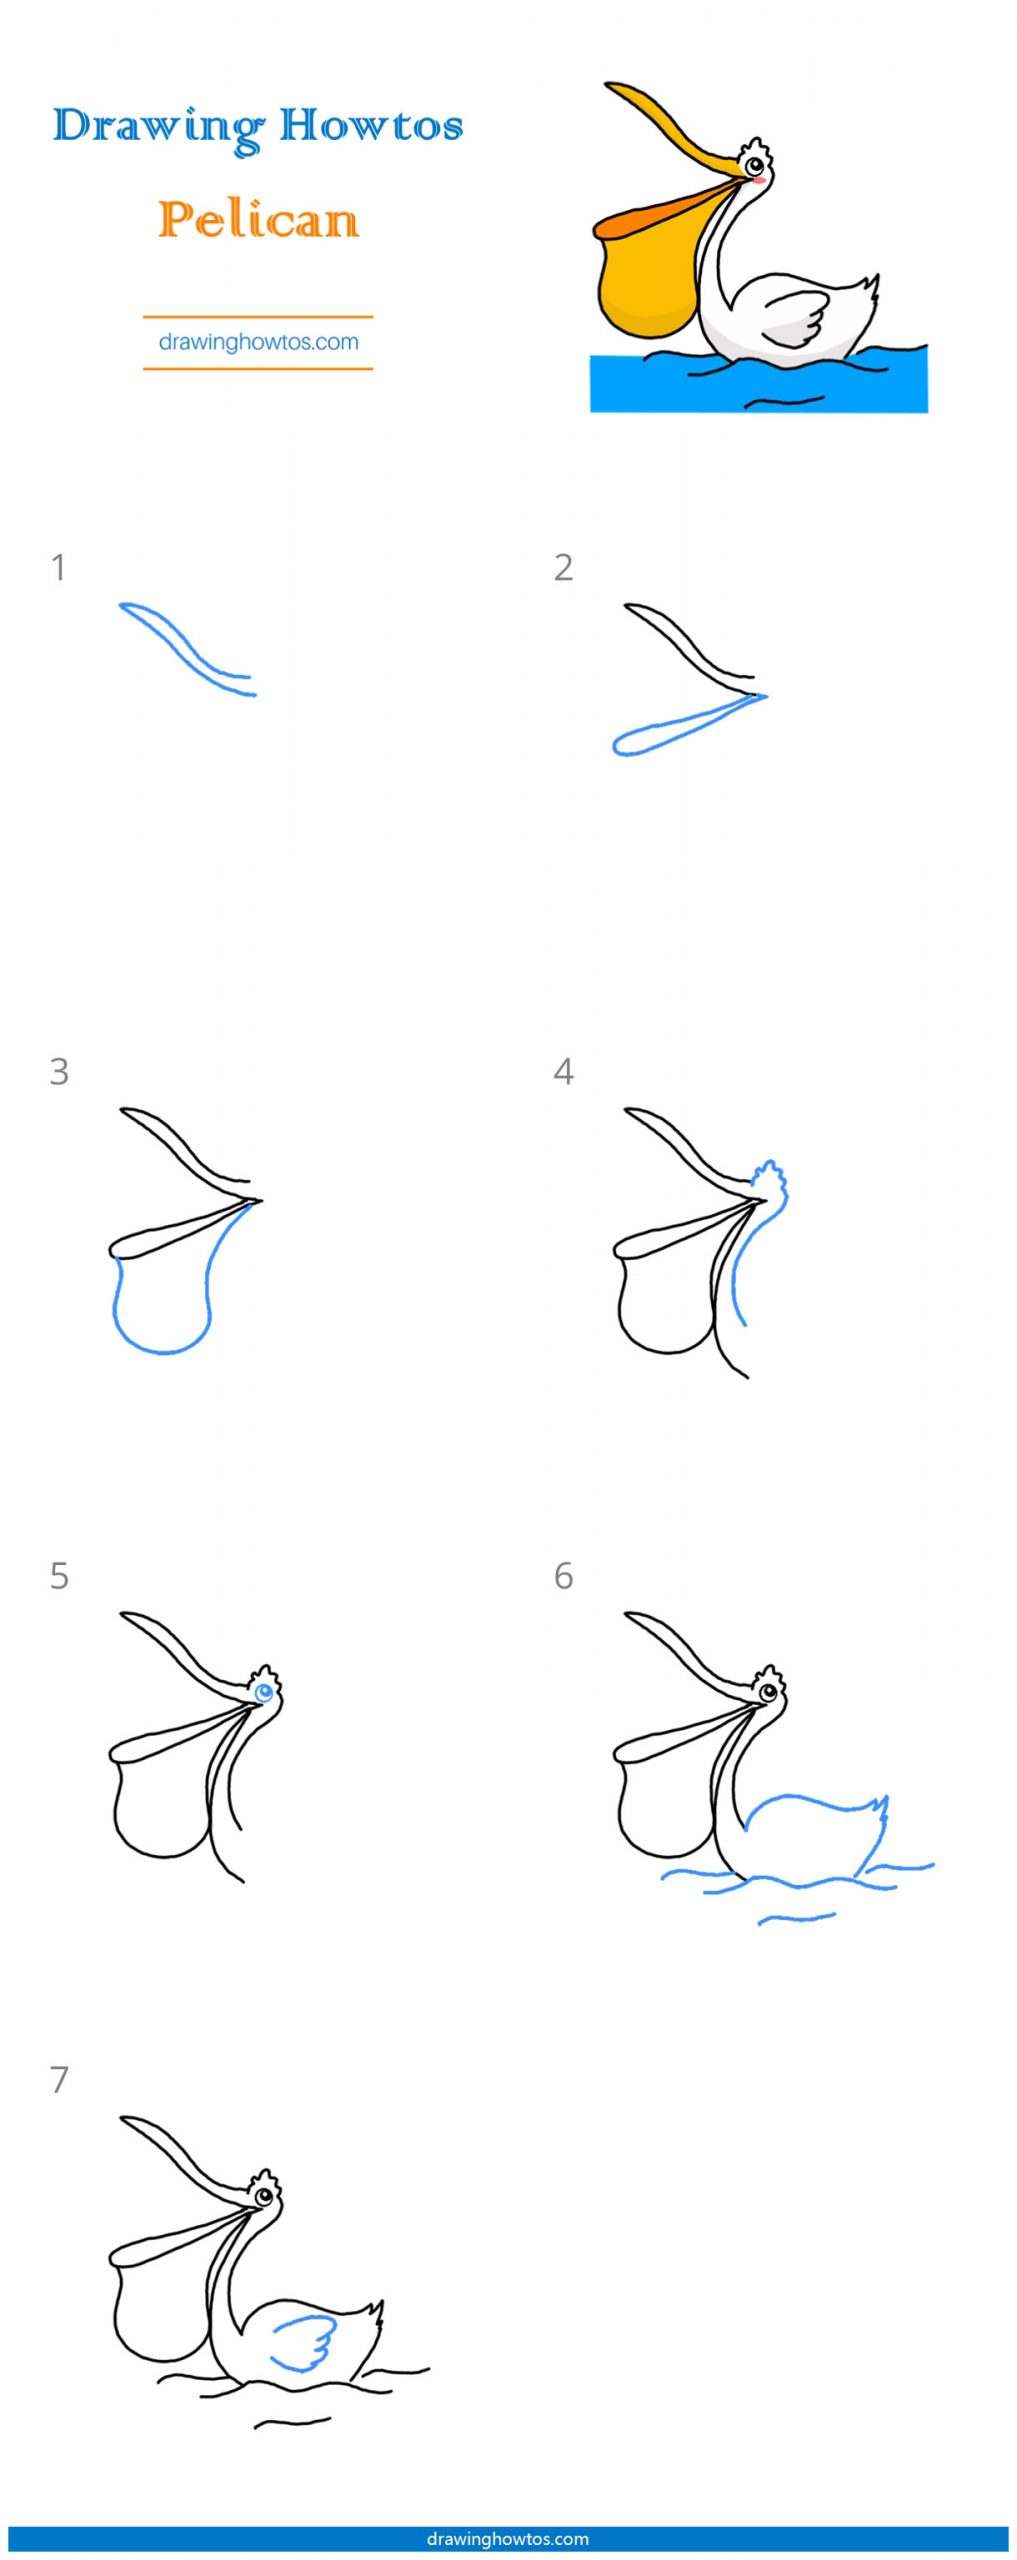 How to Draw a Pelican Step by Step